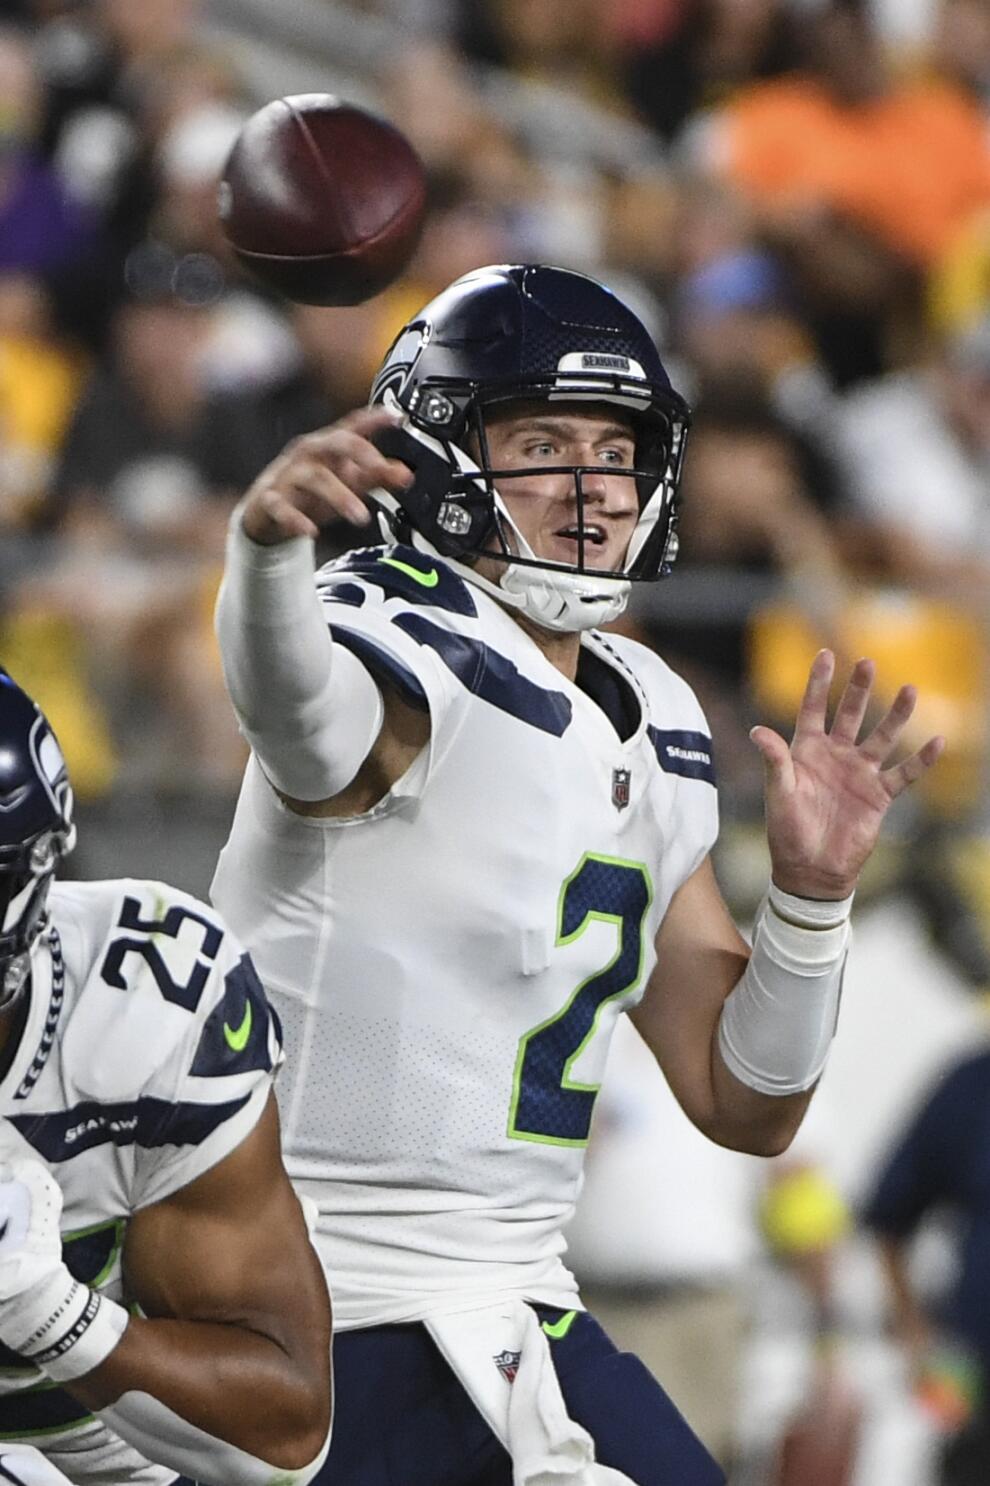 Seahawks hope to give Drew Lock plenty of action in finale - The